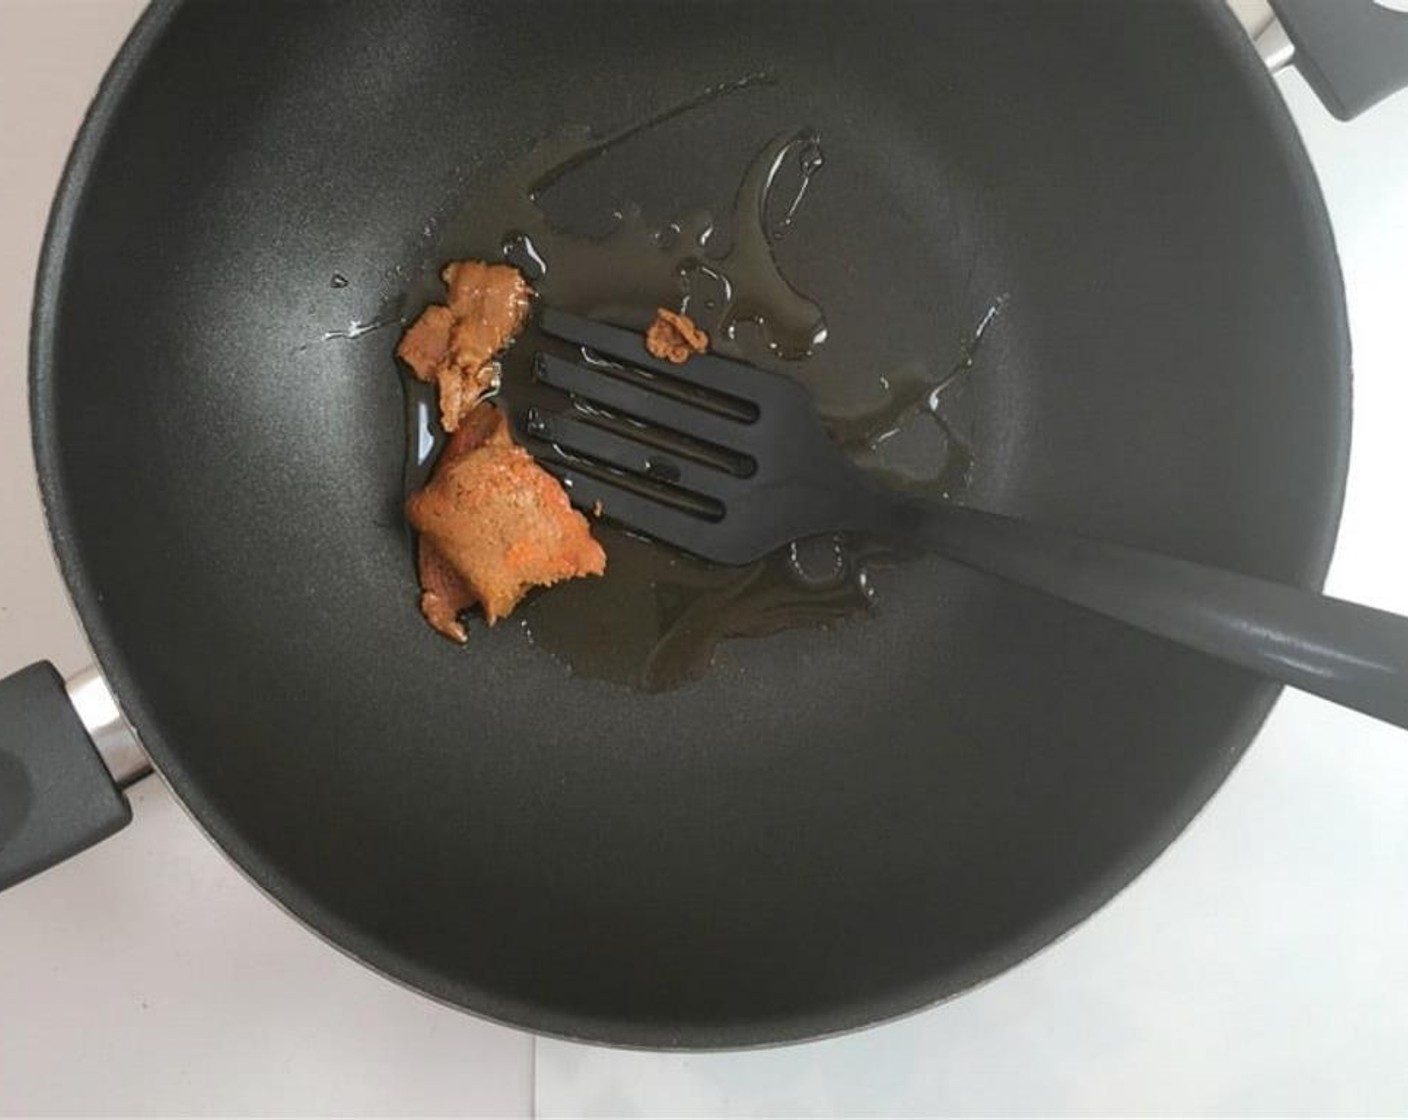 step 2 Pour Vegetable Oil (1 splash) in a large wok or non-stick pan and place it over medium-high heat. Once the oil is hot, add the Green Curry Paste (2 Tbsp).